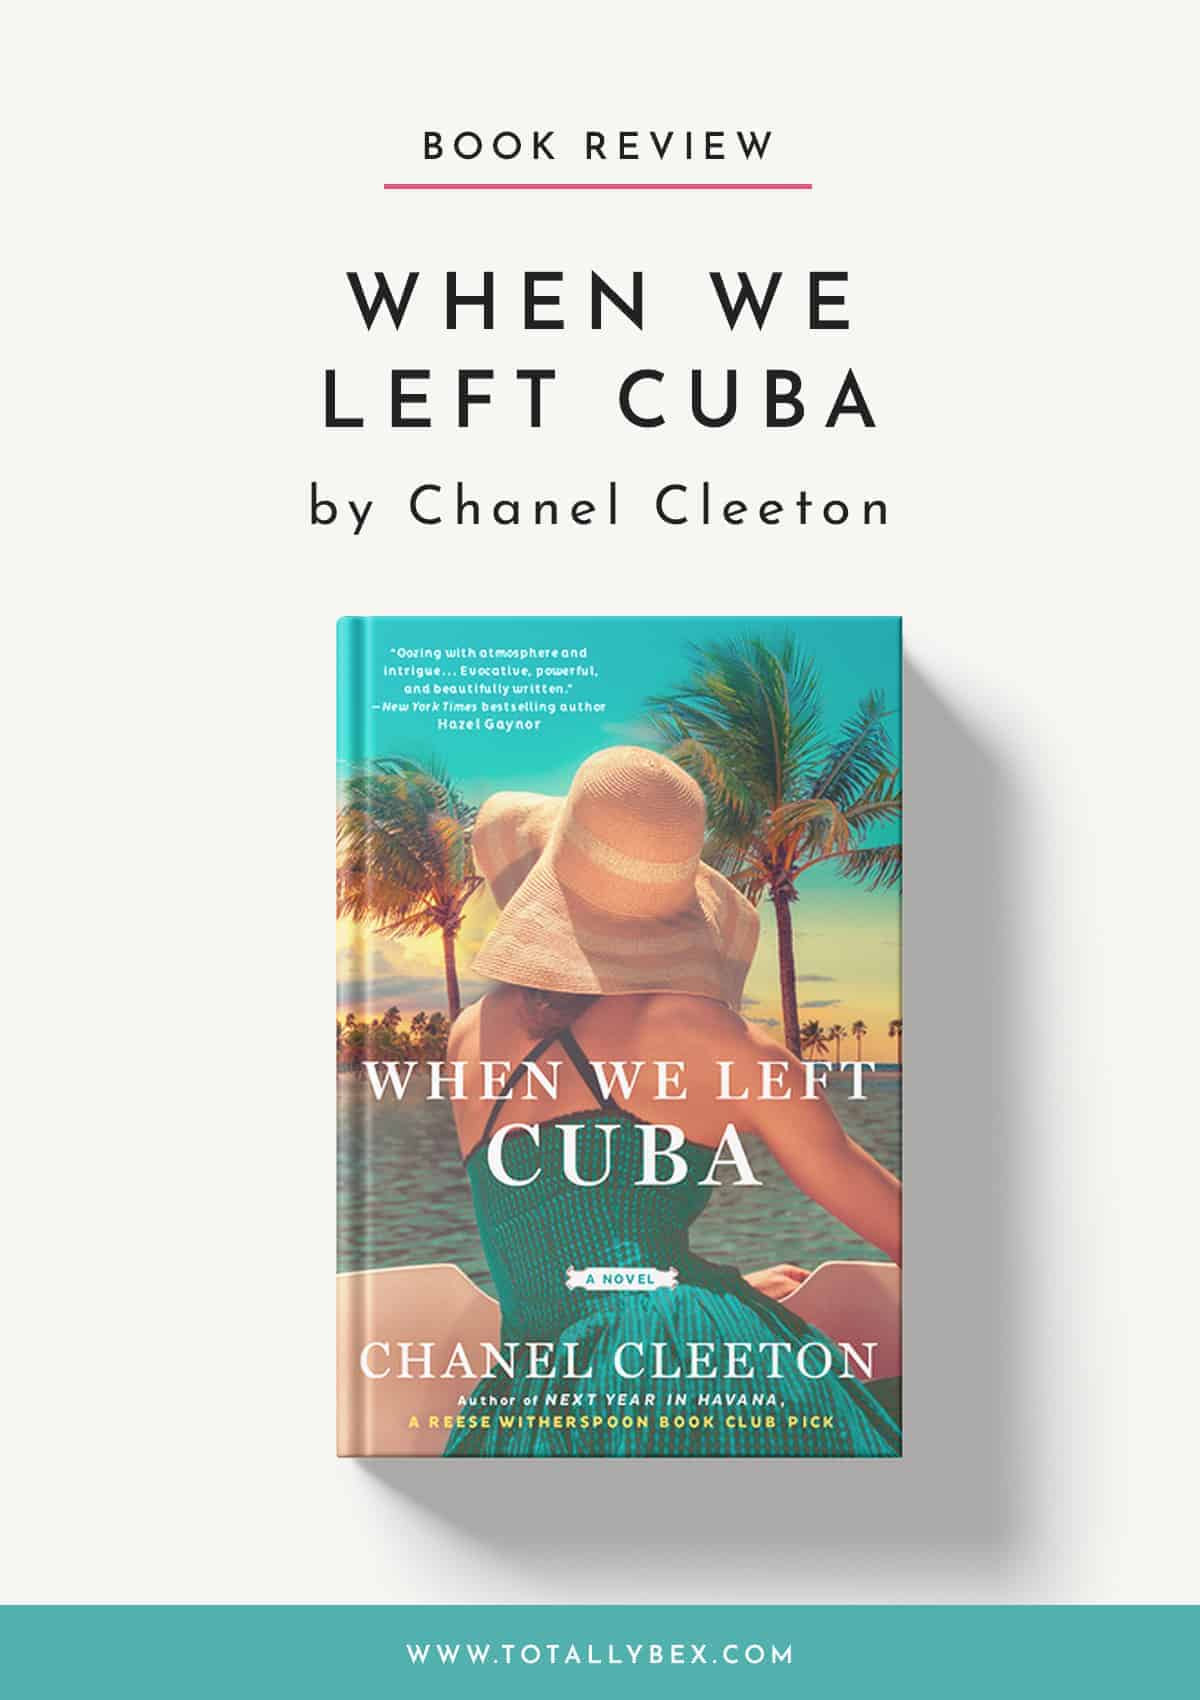 When We Left Cuba by Chanel Cleeton-Book Review